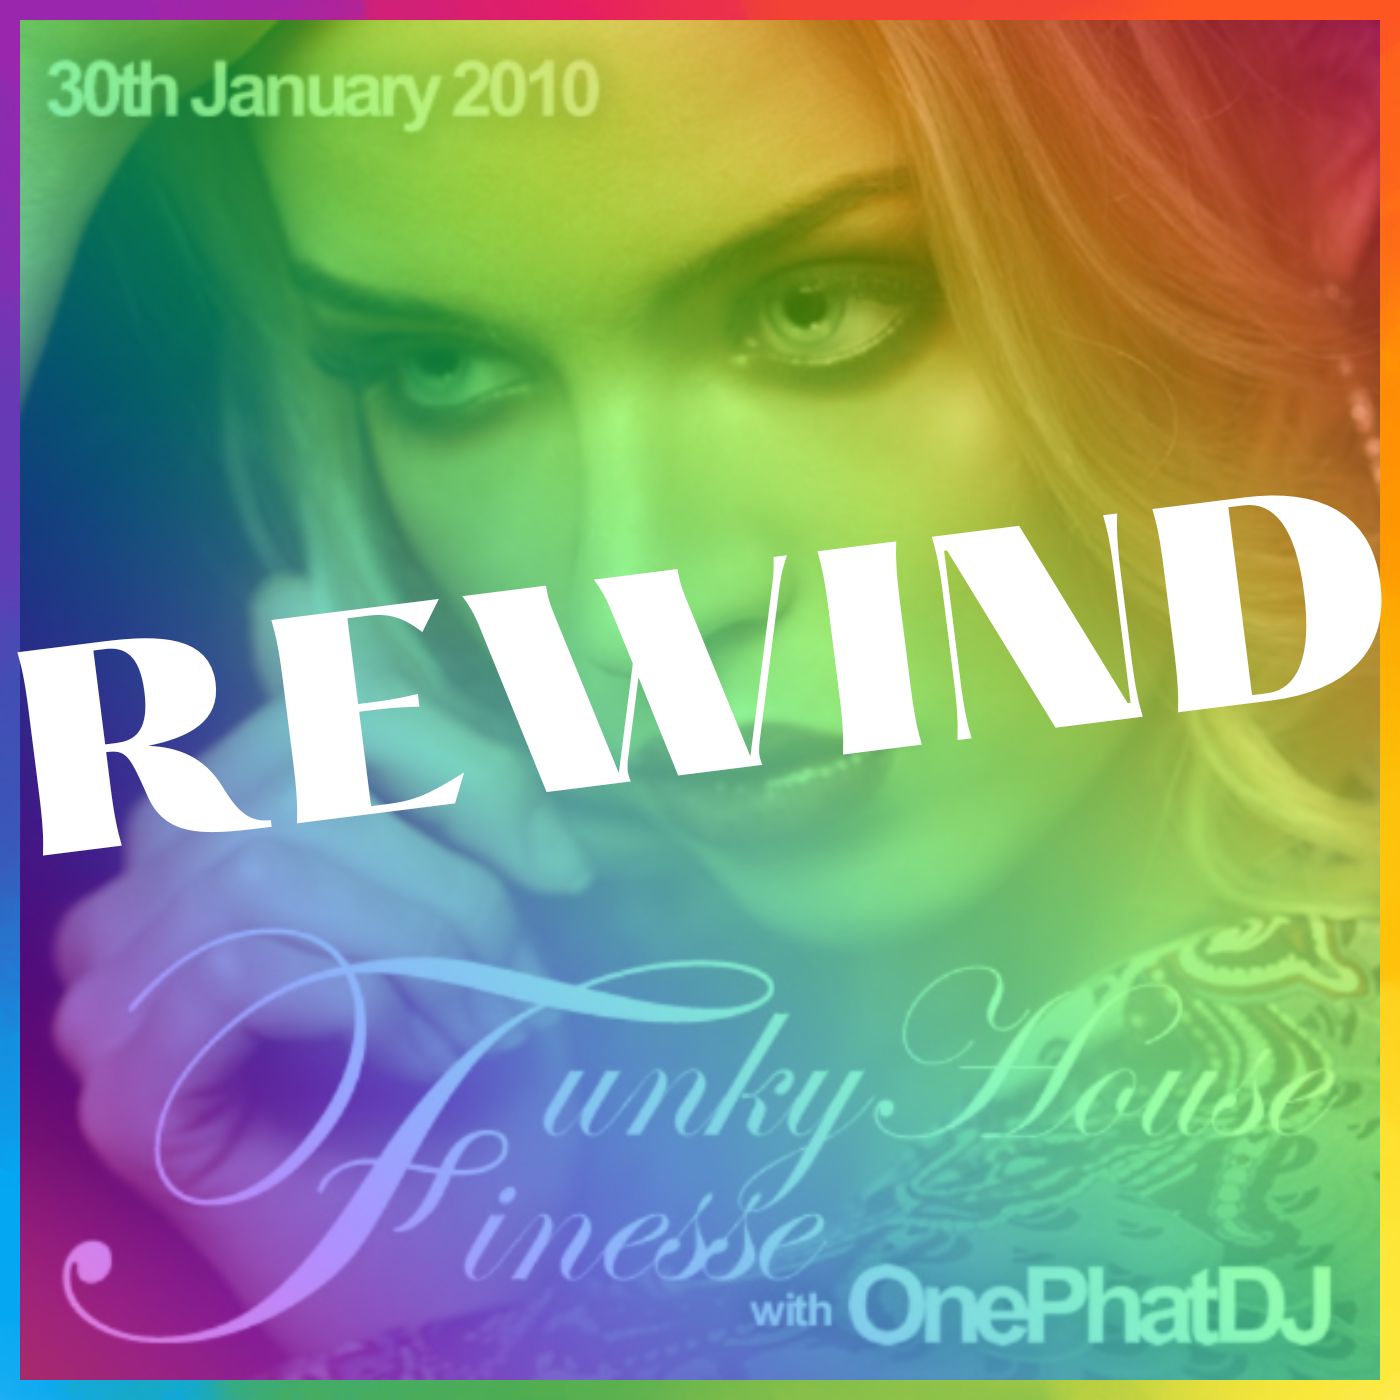 REWIND to Funky House Finesse 22